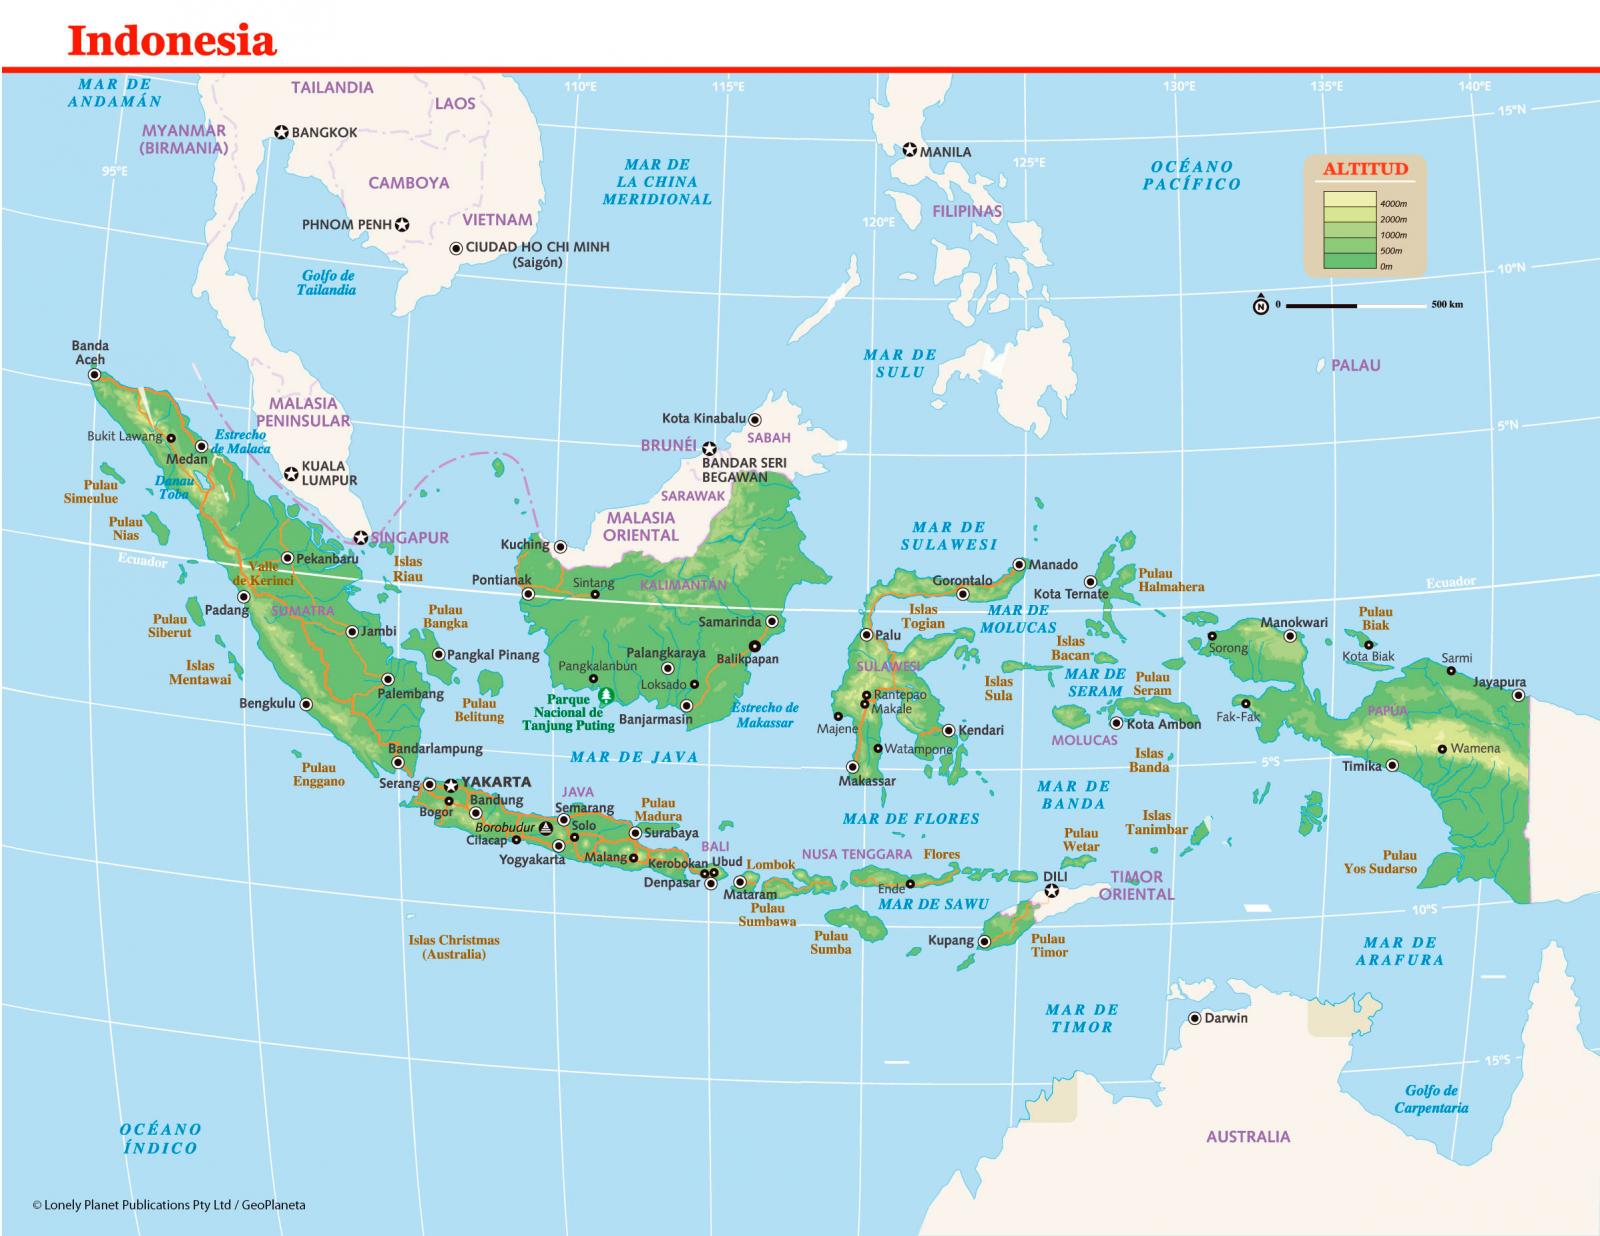 Viajar a Indonesia - Lonely Planet